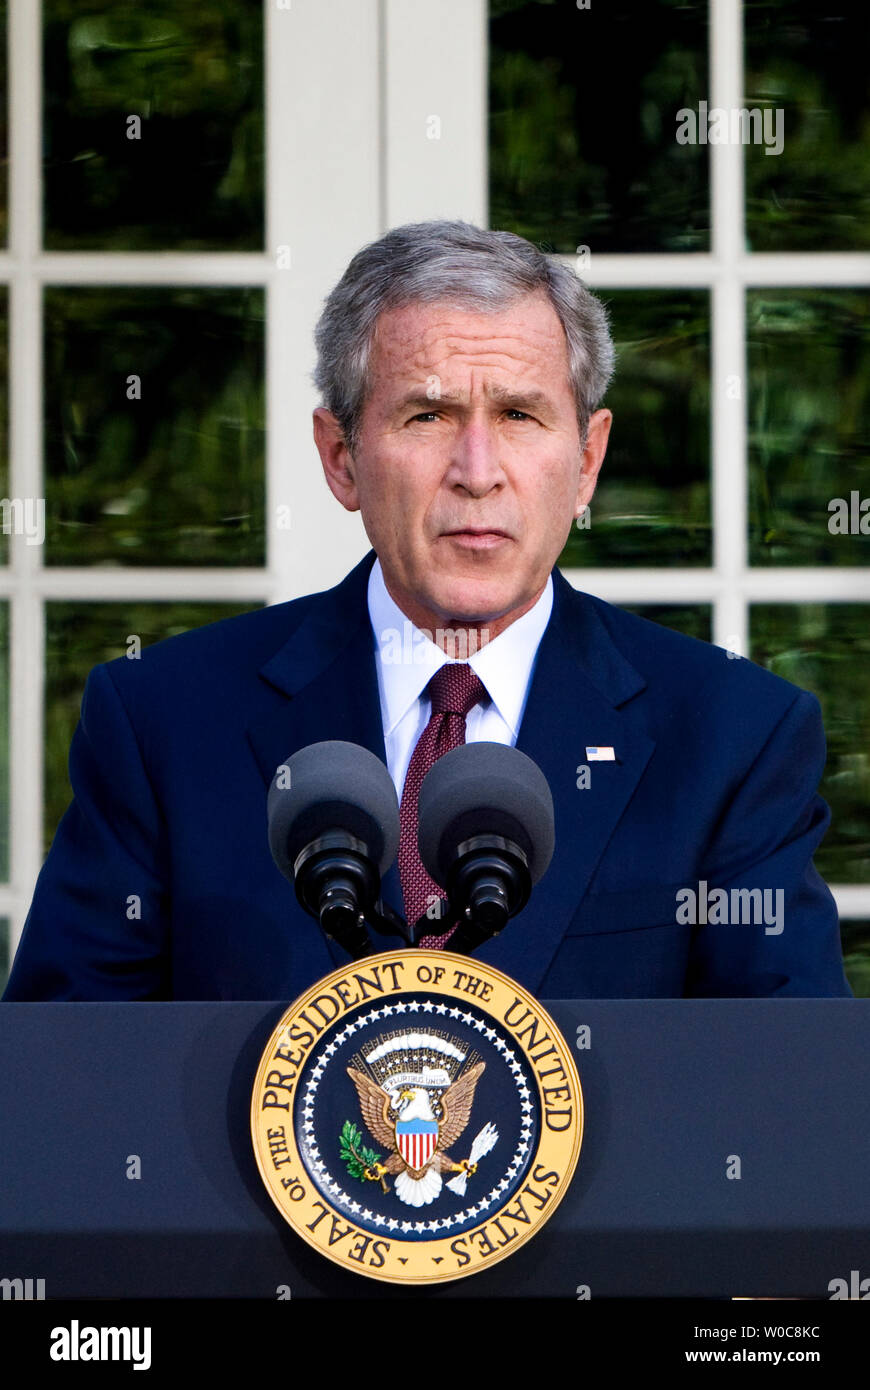 US President George W. Bush delivers remarks on the conflict between Georgia and Russia from the Rose Garden at the White House in Washington on August 11, 2008. Bush condemned the bombings by Russia in an escalation of the conflict over the South Ossetian region of Georgia. (UPI Photo/Patrick D. McDermott) Stock Photo